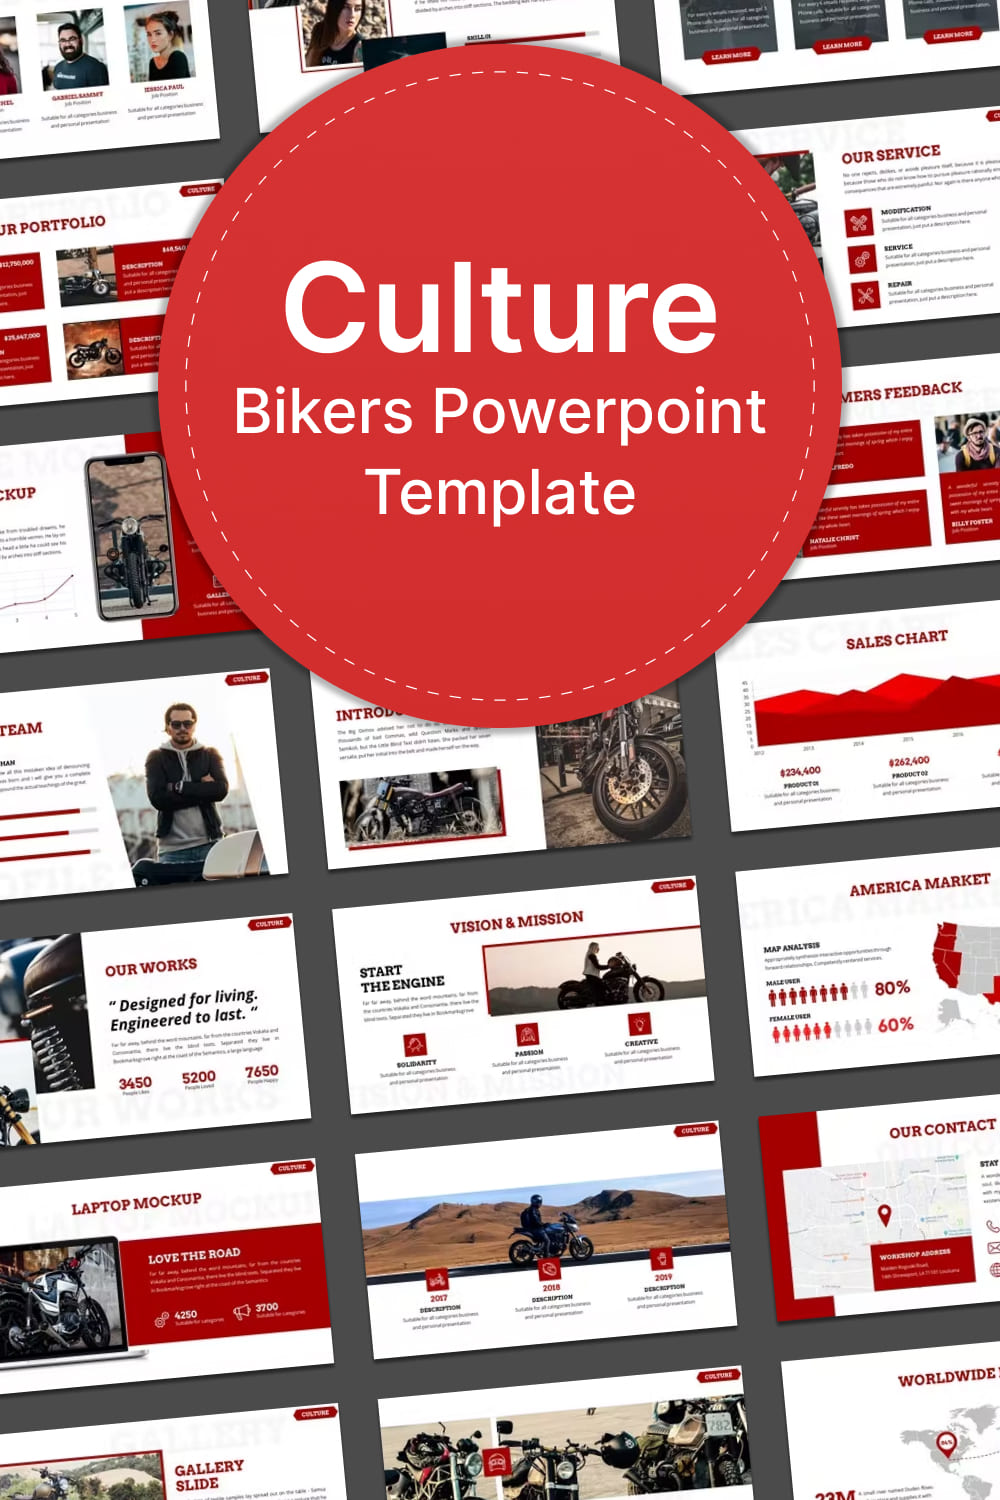 Culture bikers powerpoint template - pinterest image preview.